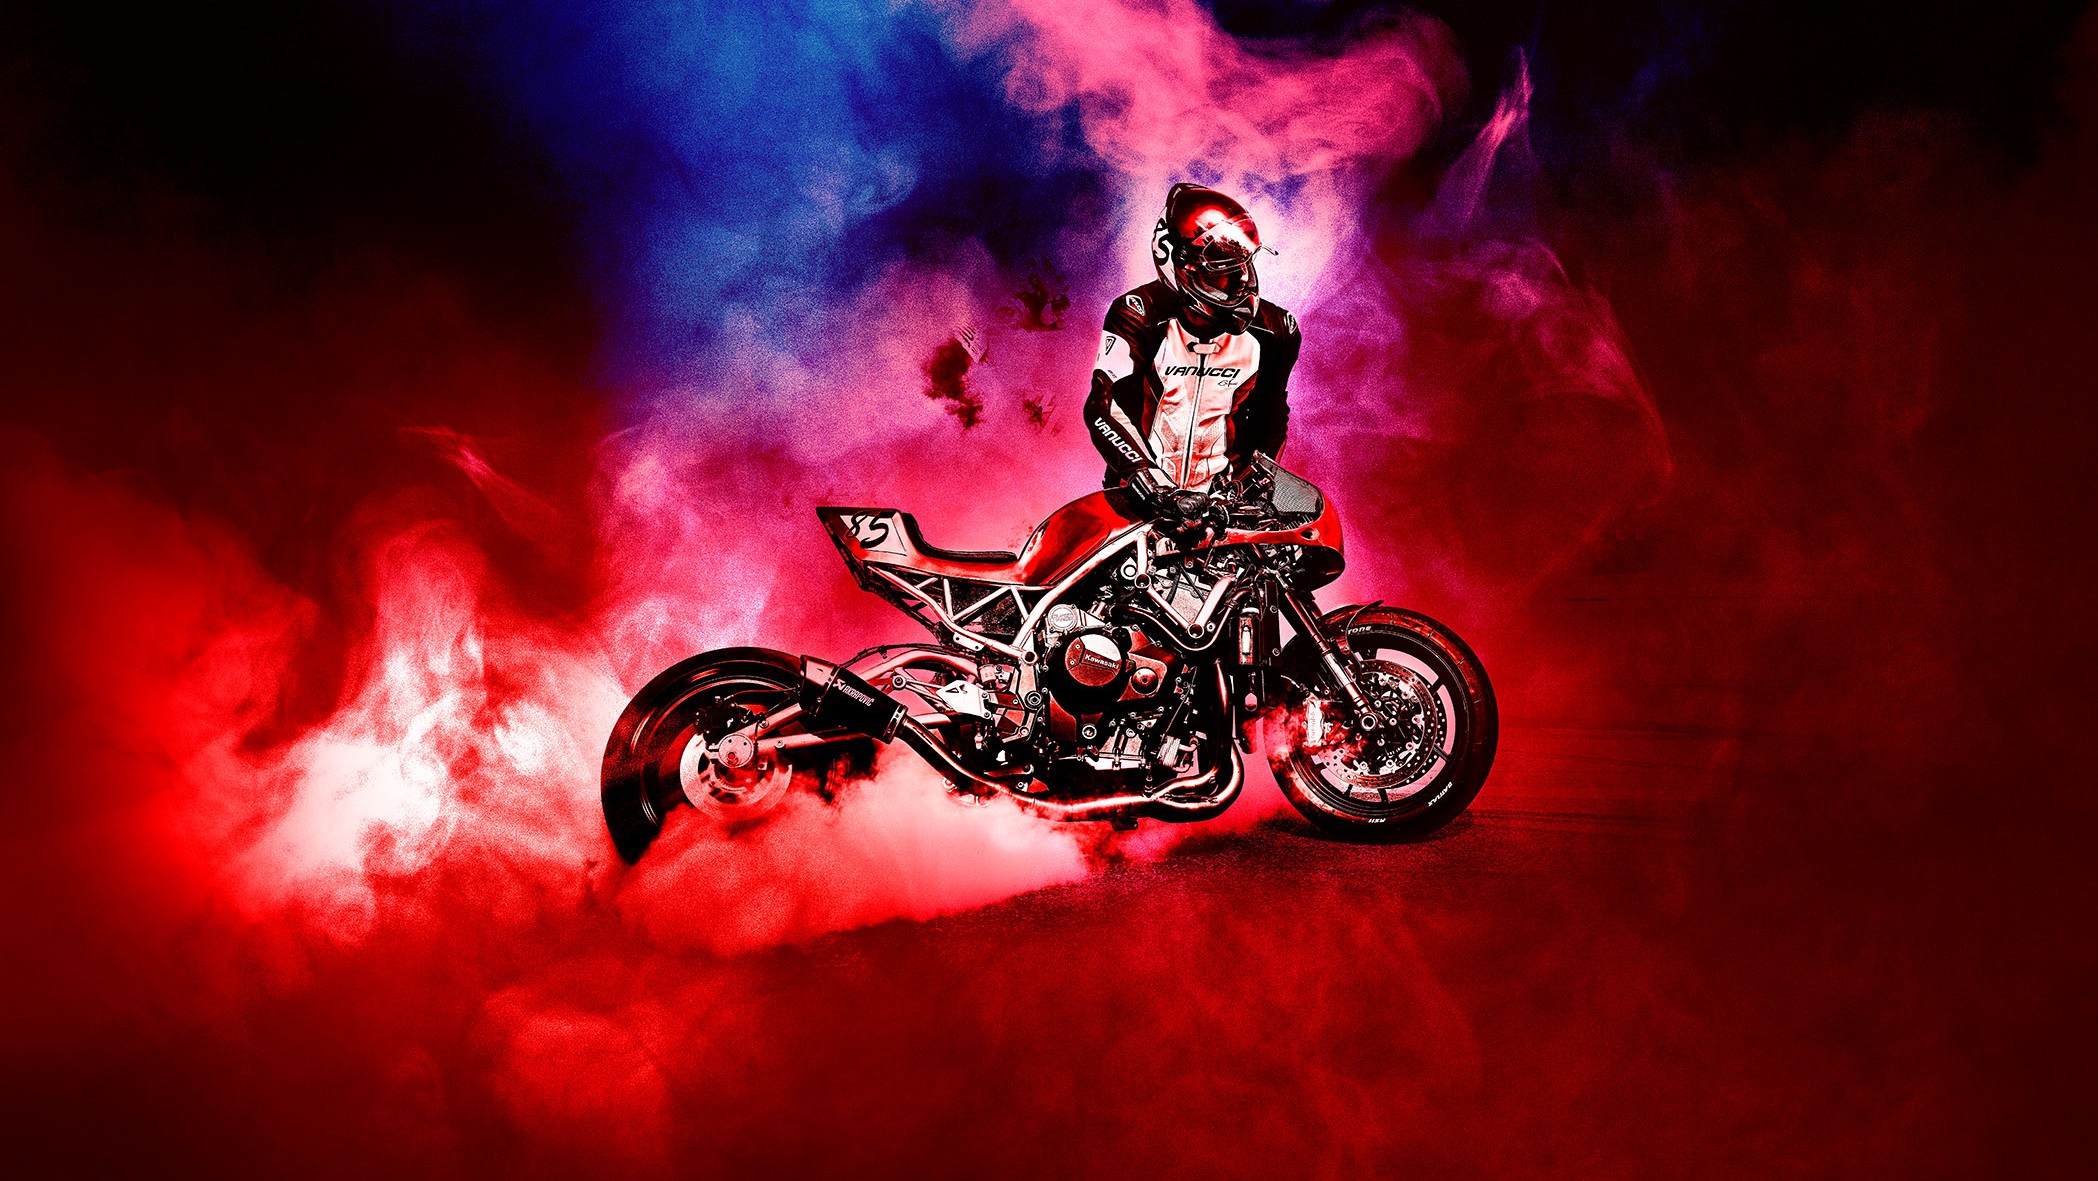 Louis – Motorcycle clothing and technology